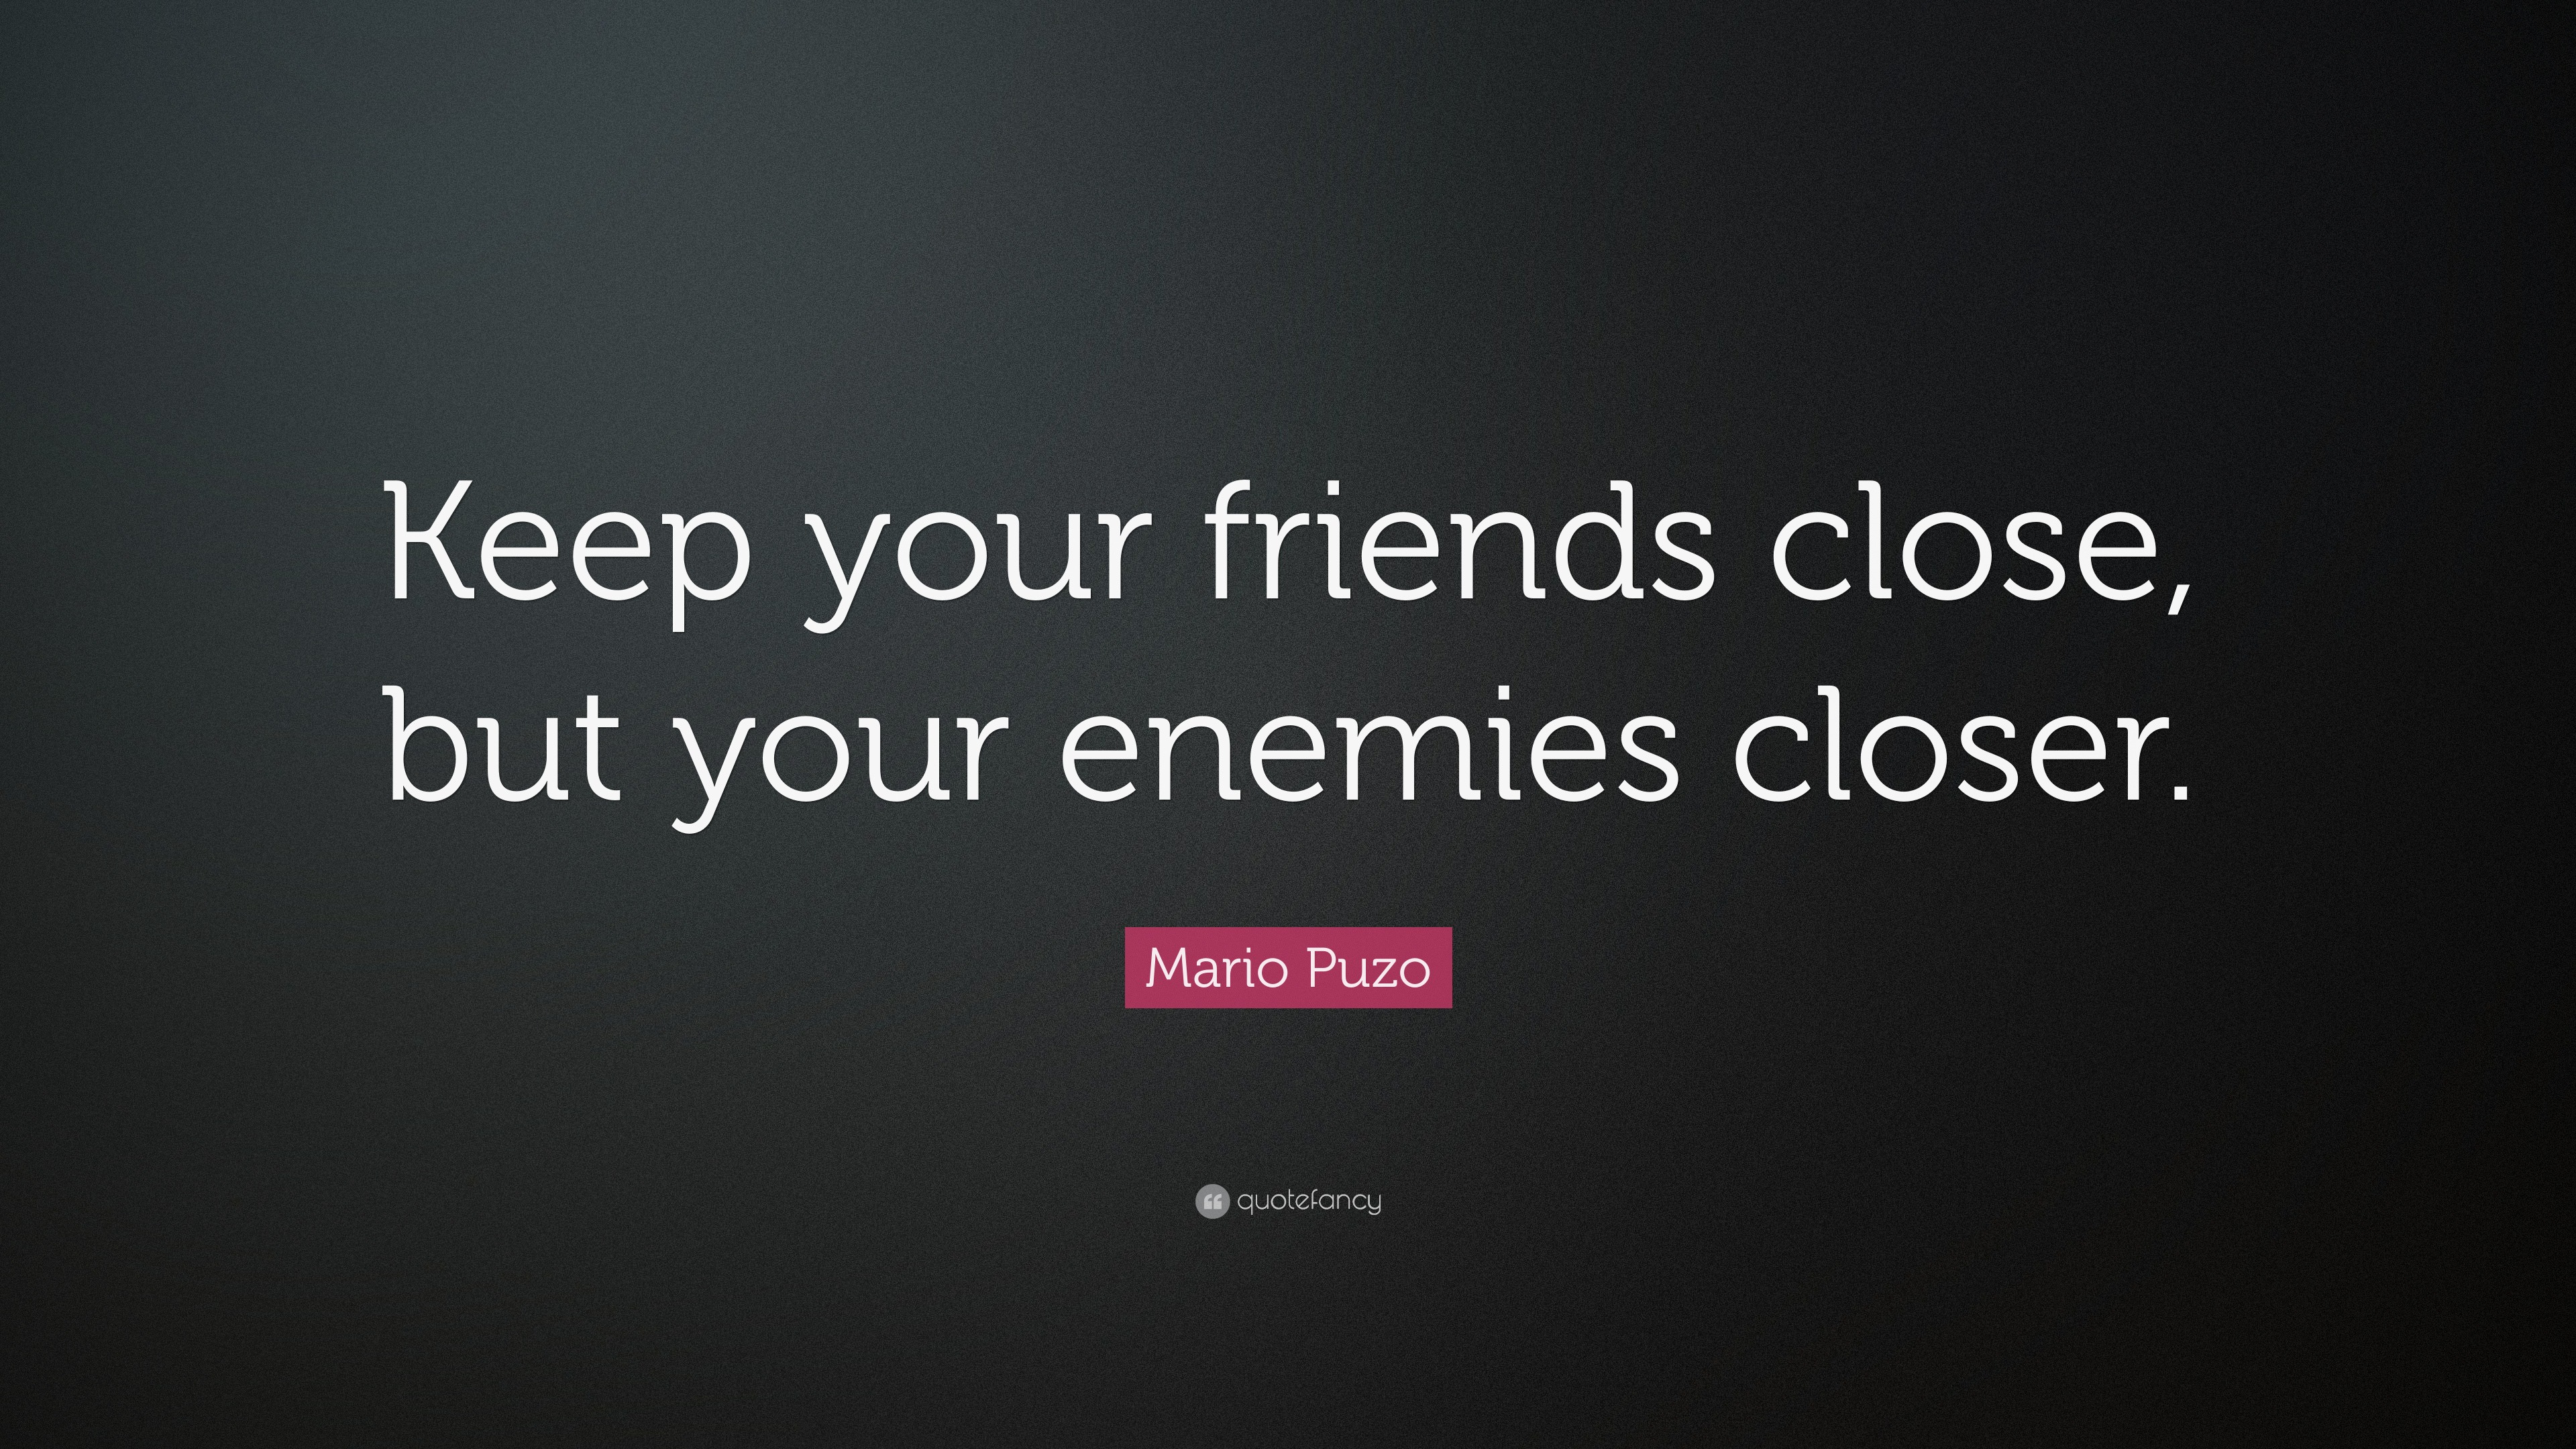 Mario Puzo Quote: “Keep your friends close, but your enemies closer